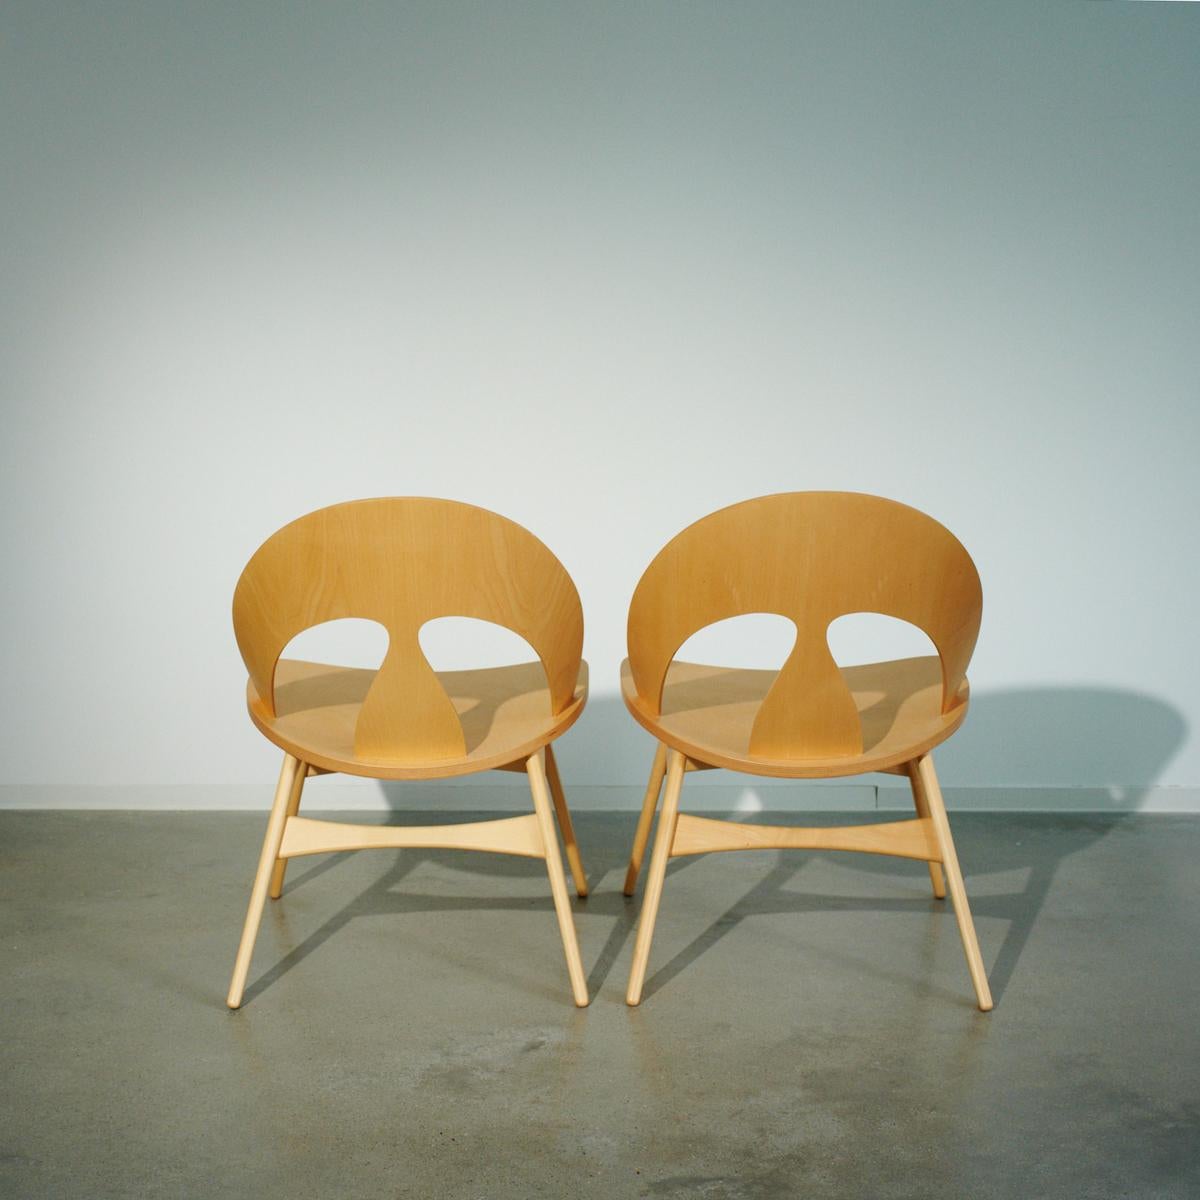 20th Century Pair of Chairs in Moulded Plywood Maple by Børge Mogensen, 1949 For Sale